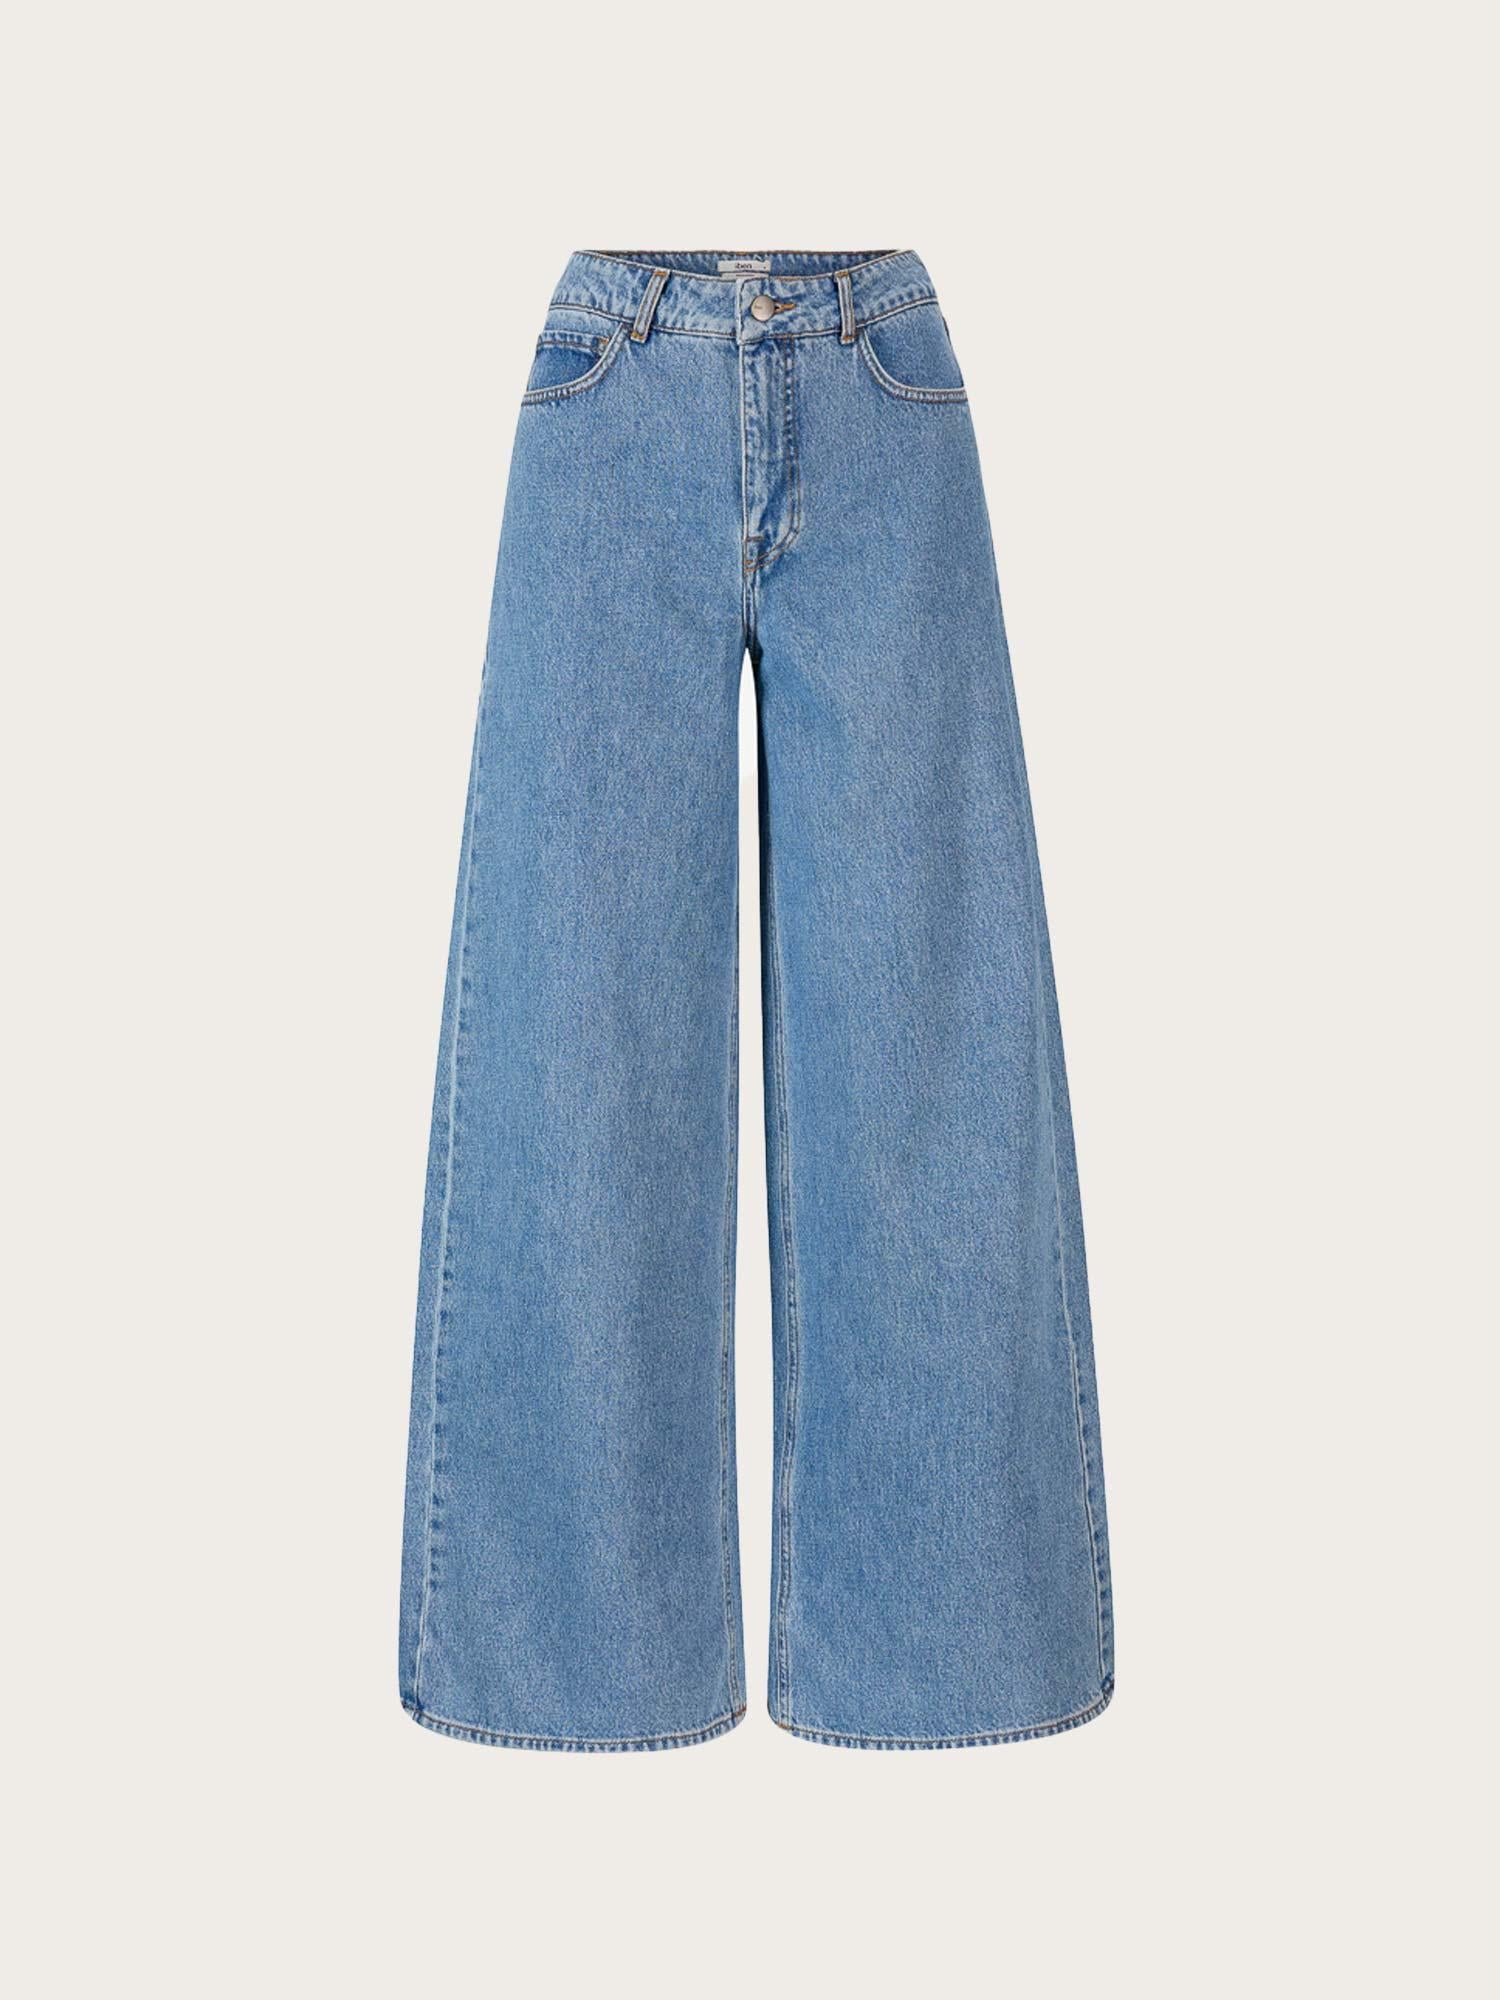 Reign Extra Wide Pant - Blue